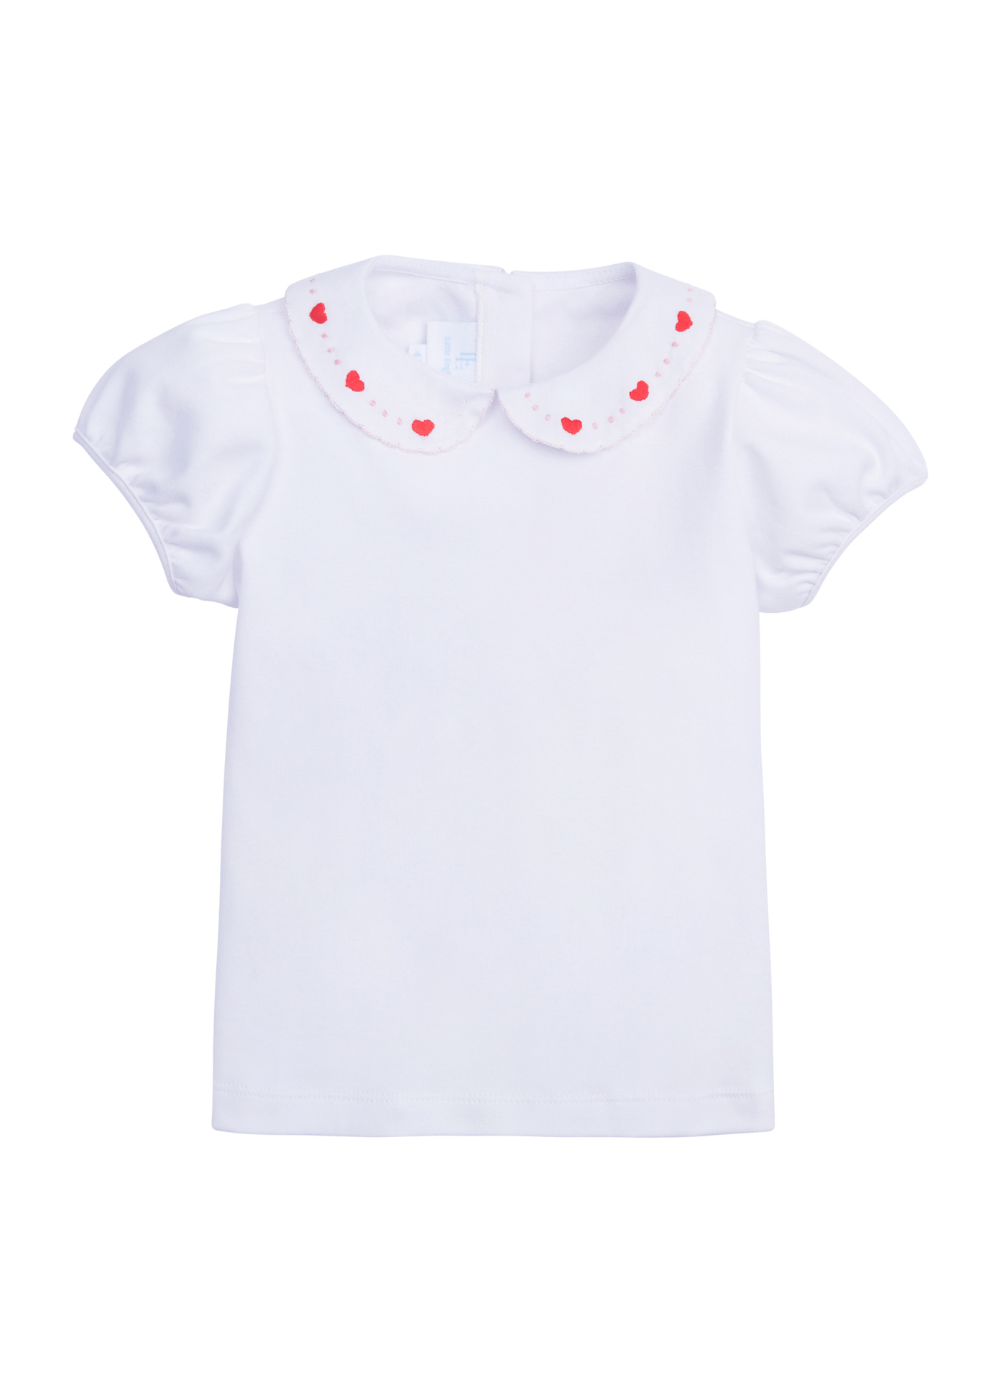 seguridadindustrialcr girl's knit short sleeve top with heart embroidery at the collar